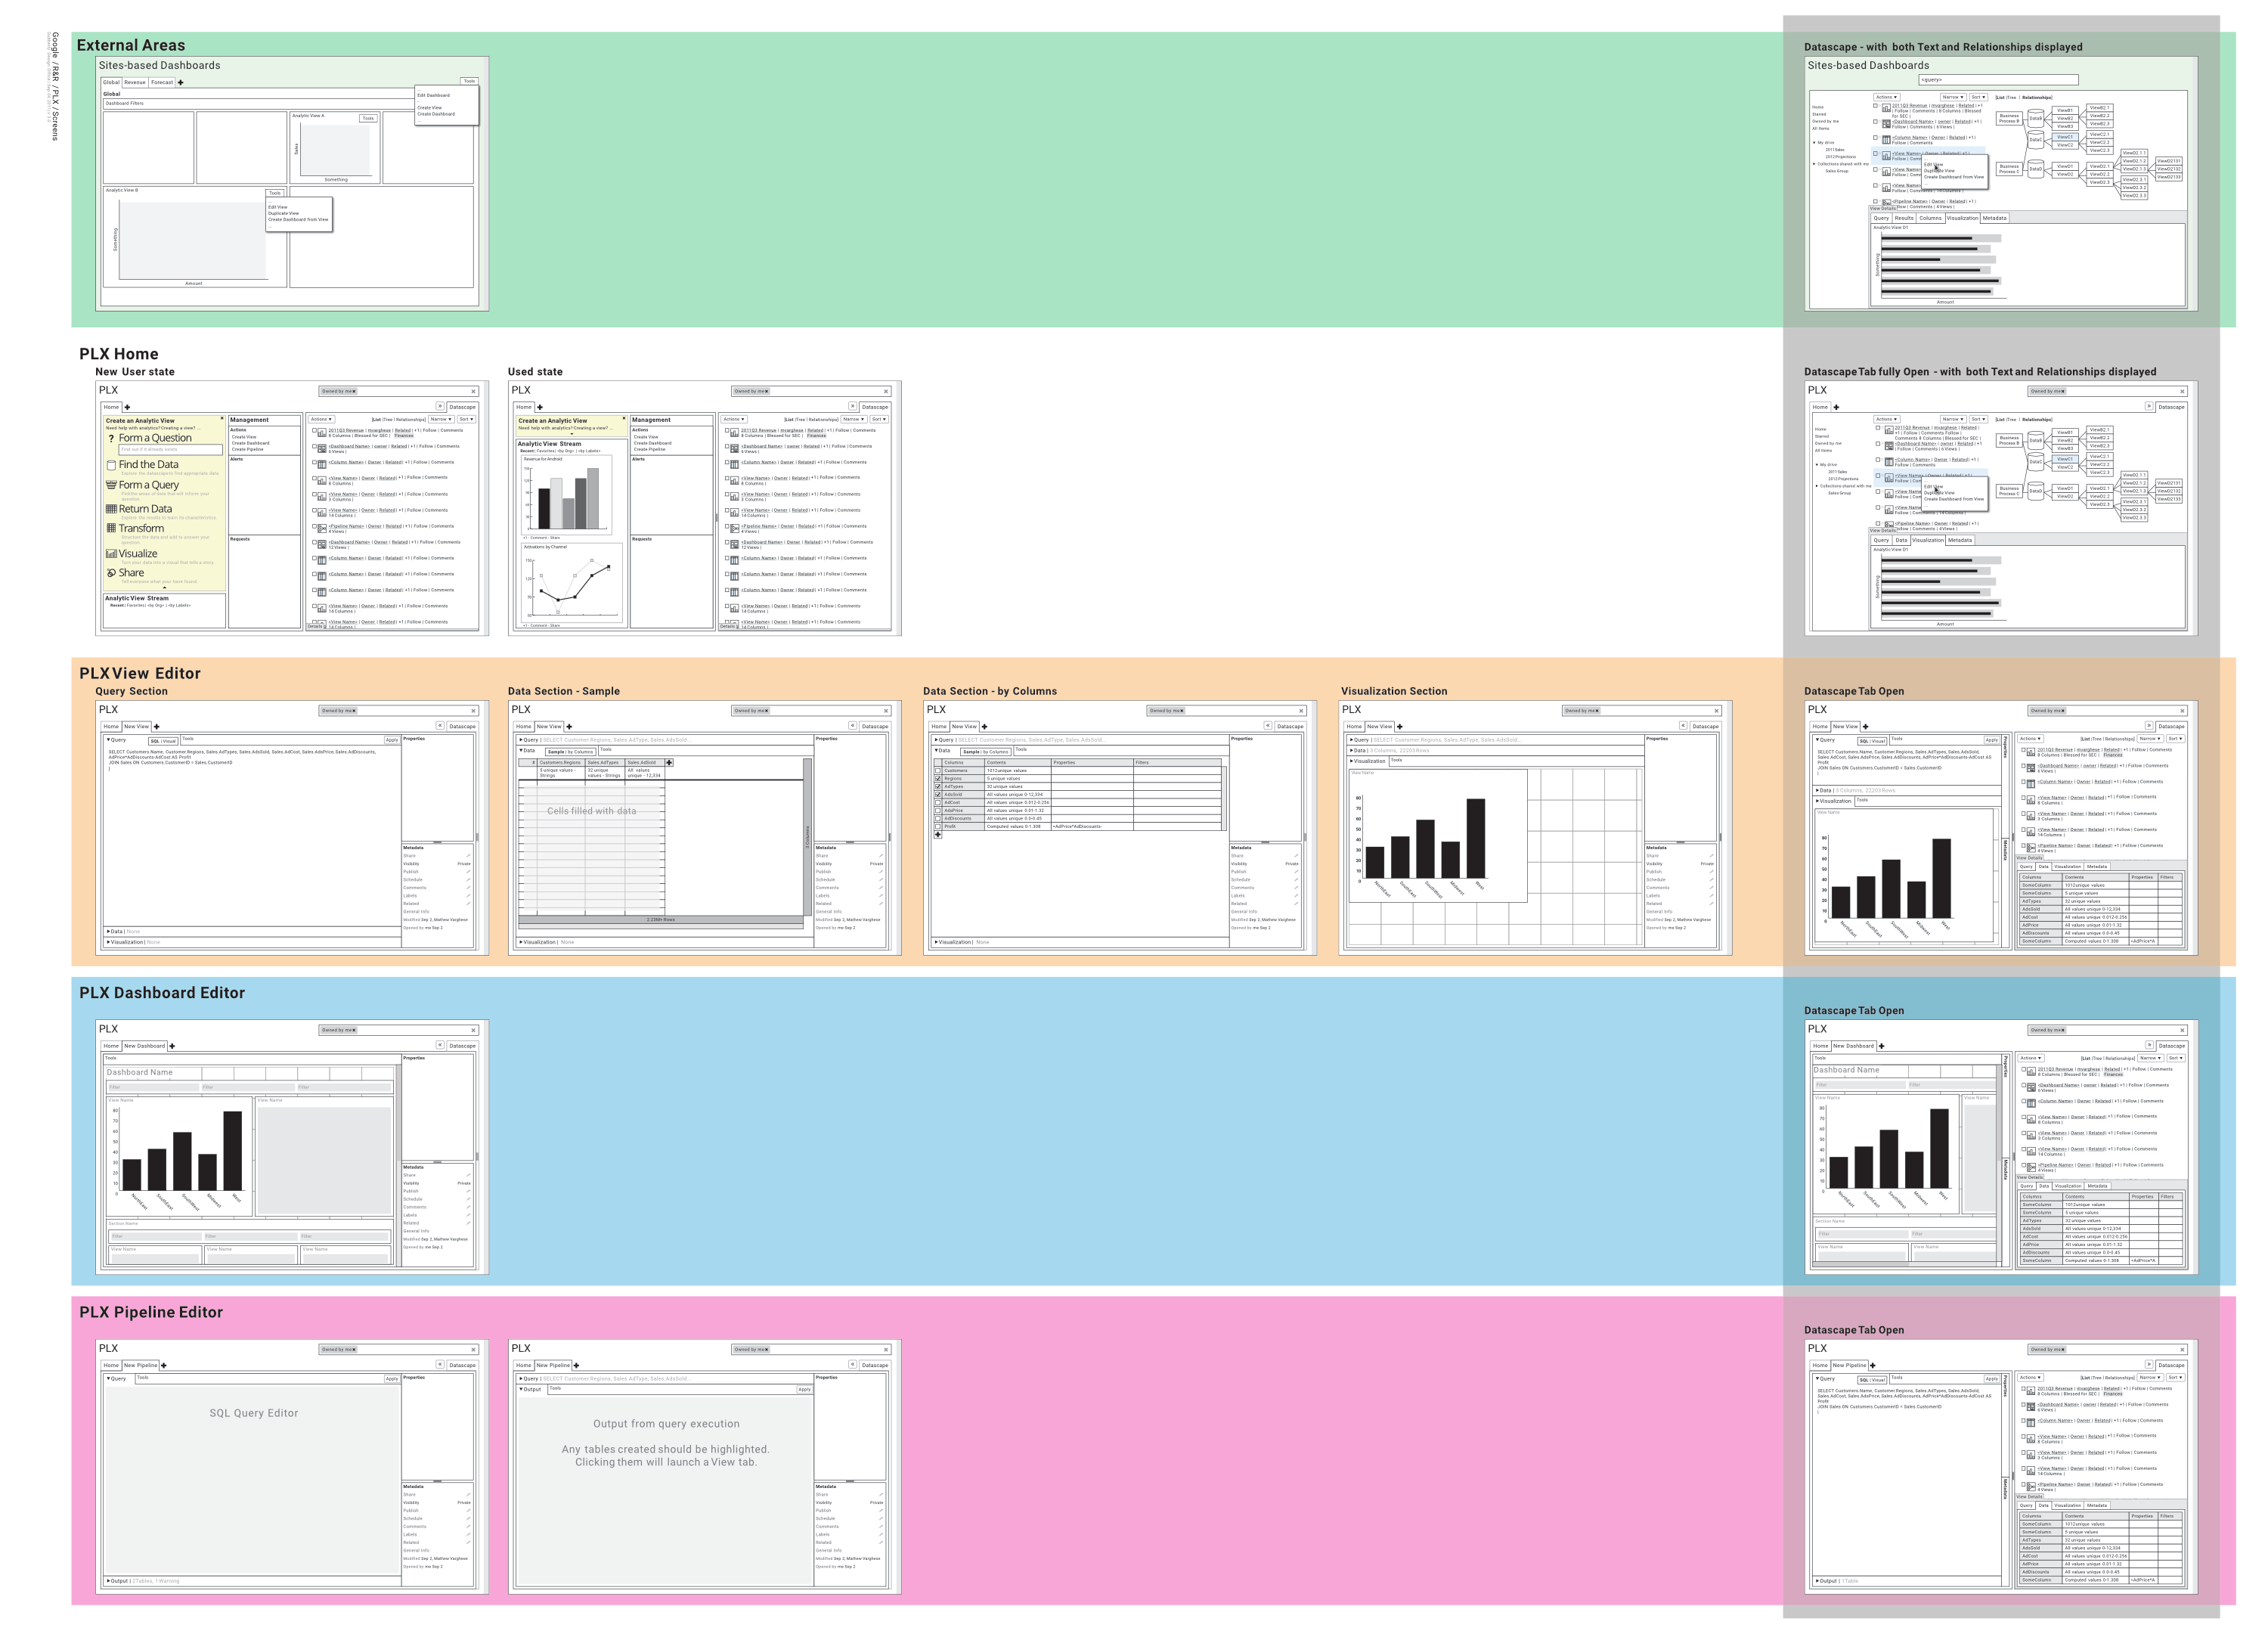 wireframes showing area users would need to accomplish activities